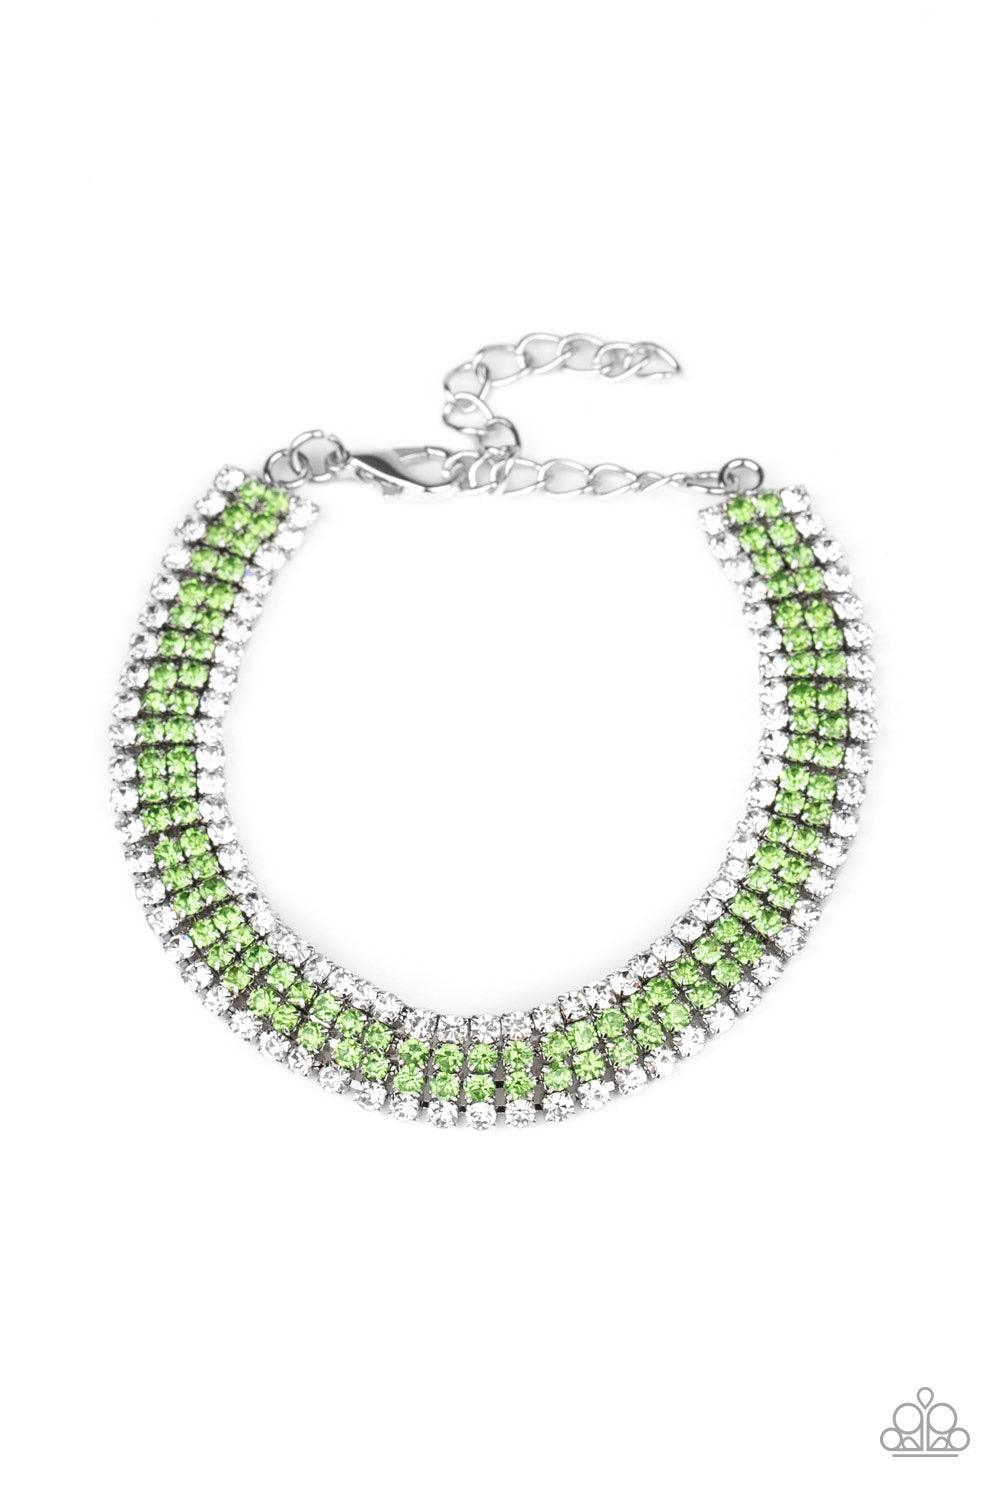 Paparazzi Accessories Color Me Couture - Green Flanked by strands of glassy white rhinestones, two rows of glittery green rhinestones layer across the wrist, coalescing into a single strand of glitz. Features an adjustable clasp closure. Jewelry